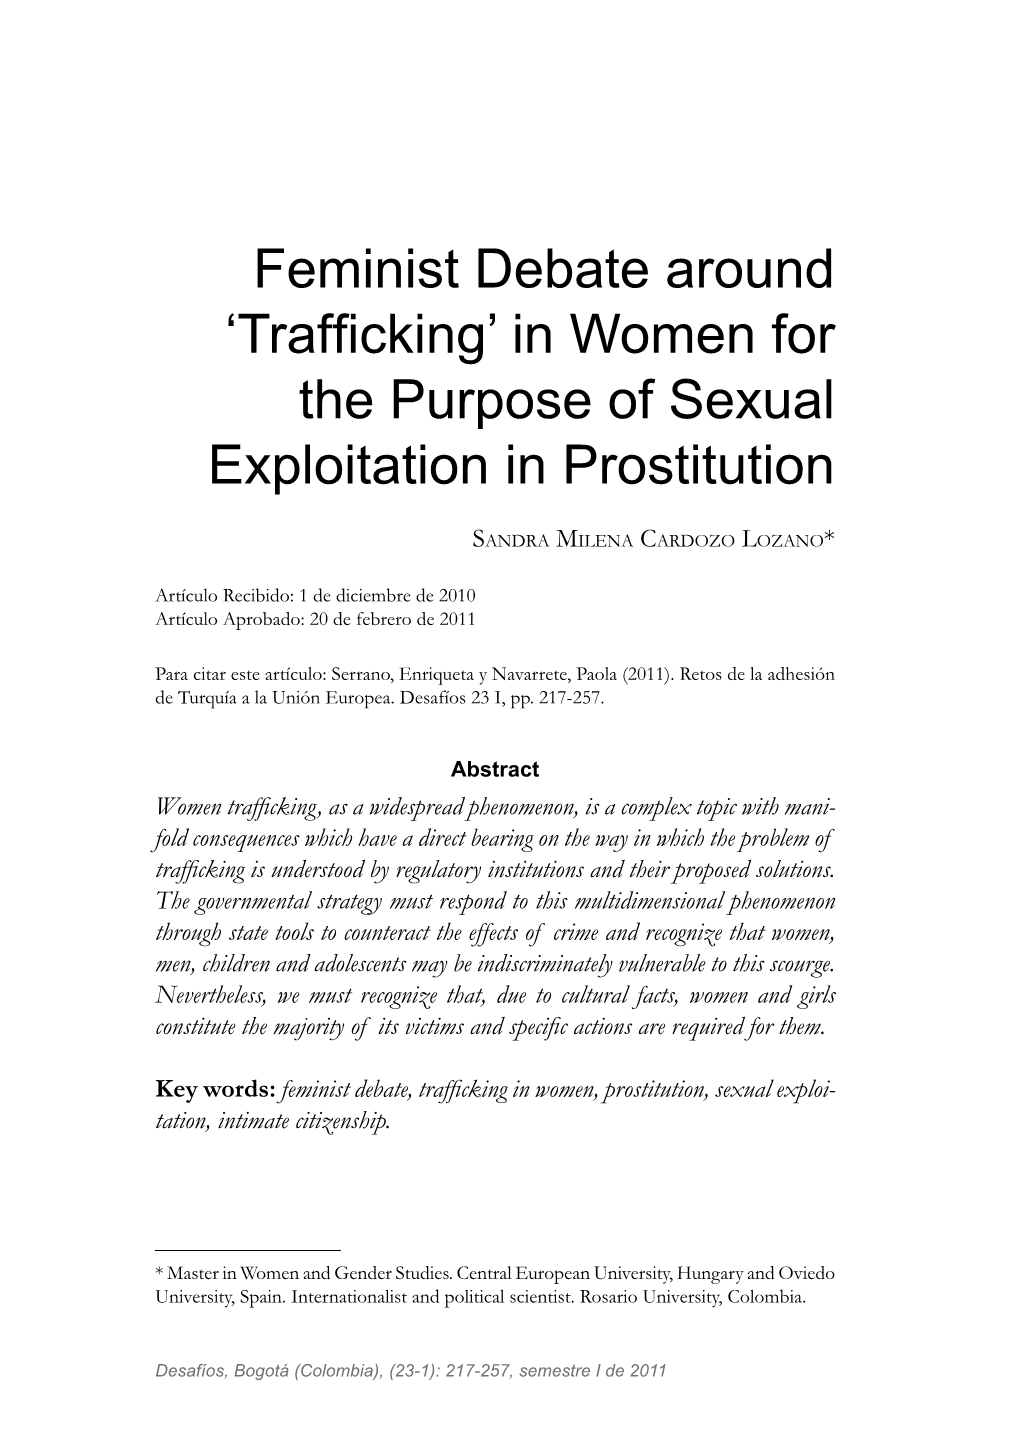 Feminist Debate Around 'Trafficking' in Women for the Purpose of Sexual Exploitation in Prostitution